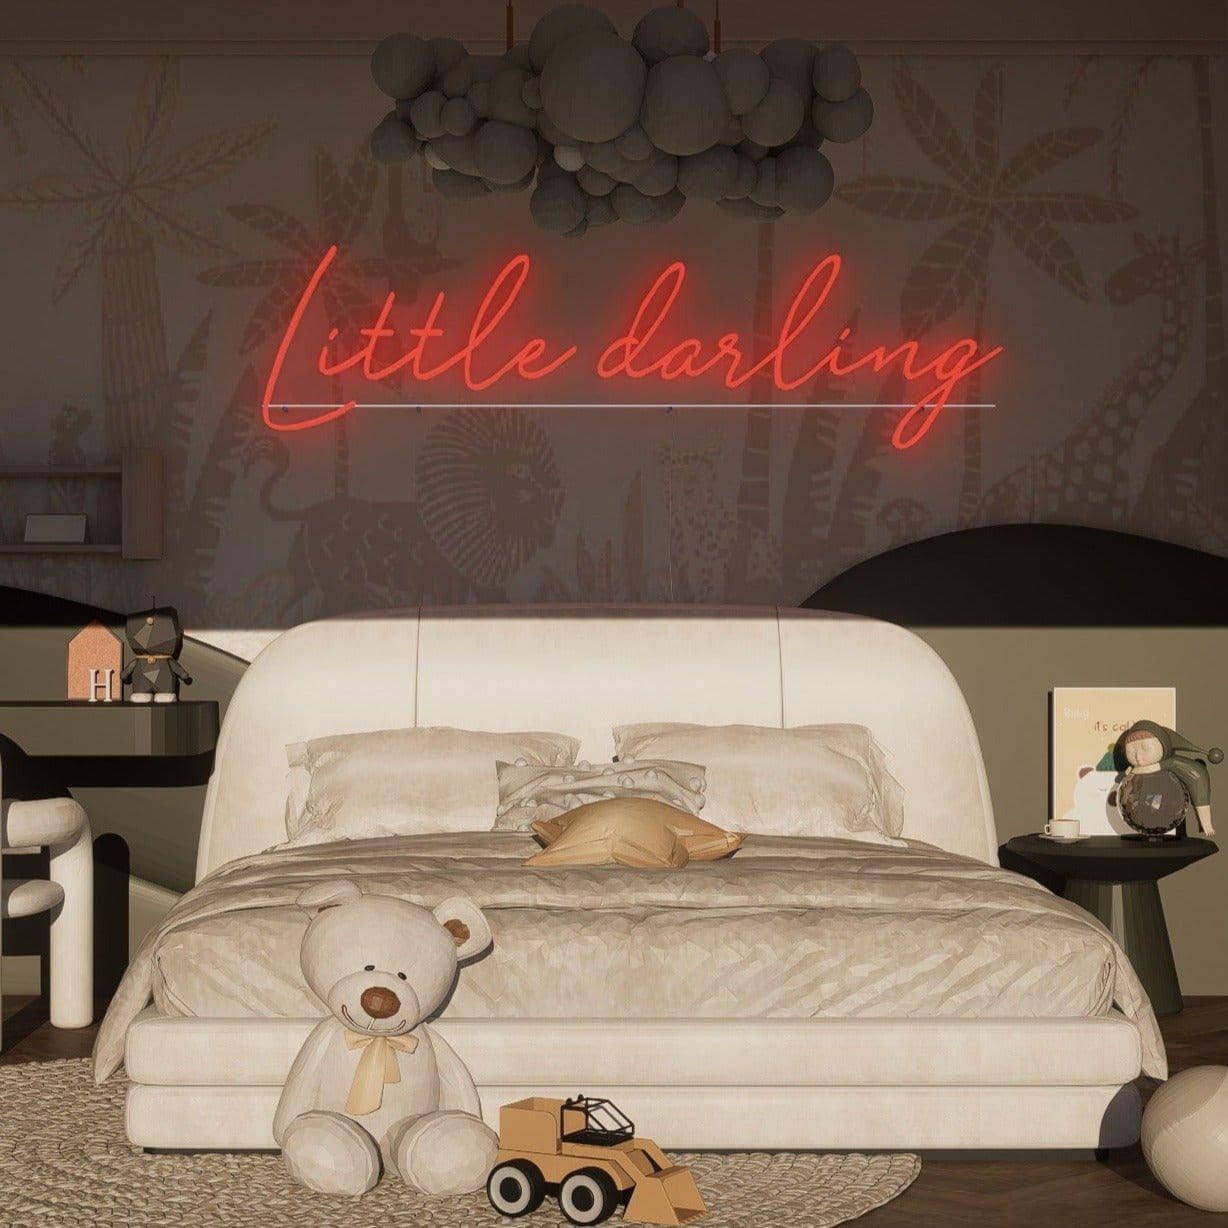 red-neon-lights-are-lit-during-the-day-and-displayed-in-the-bedroom-little-darling